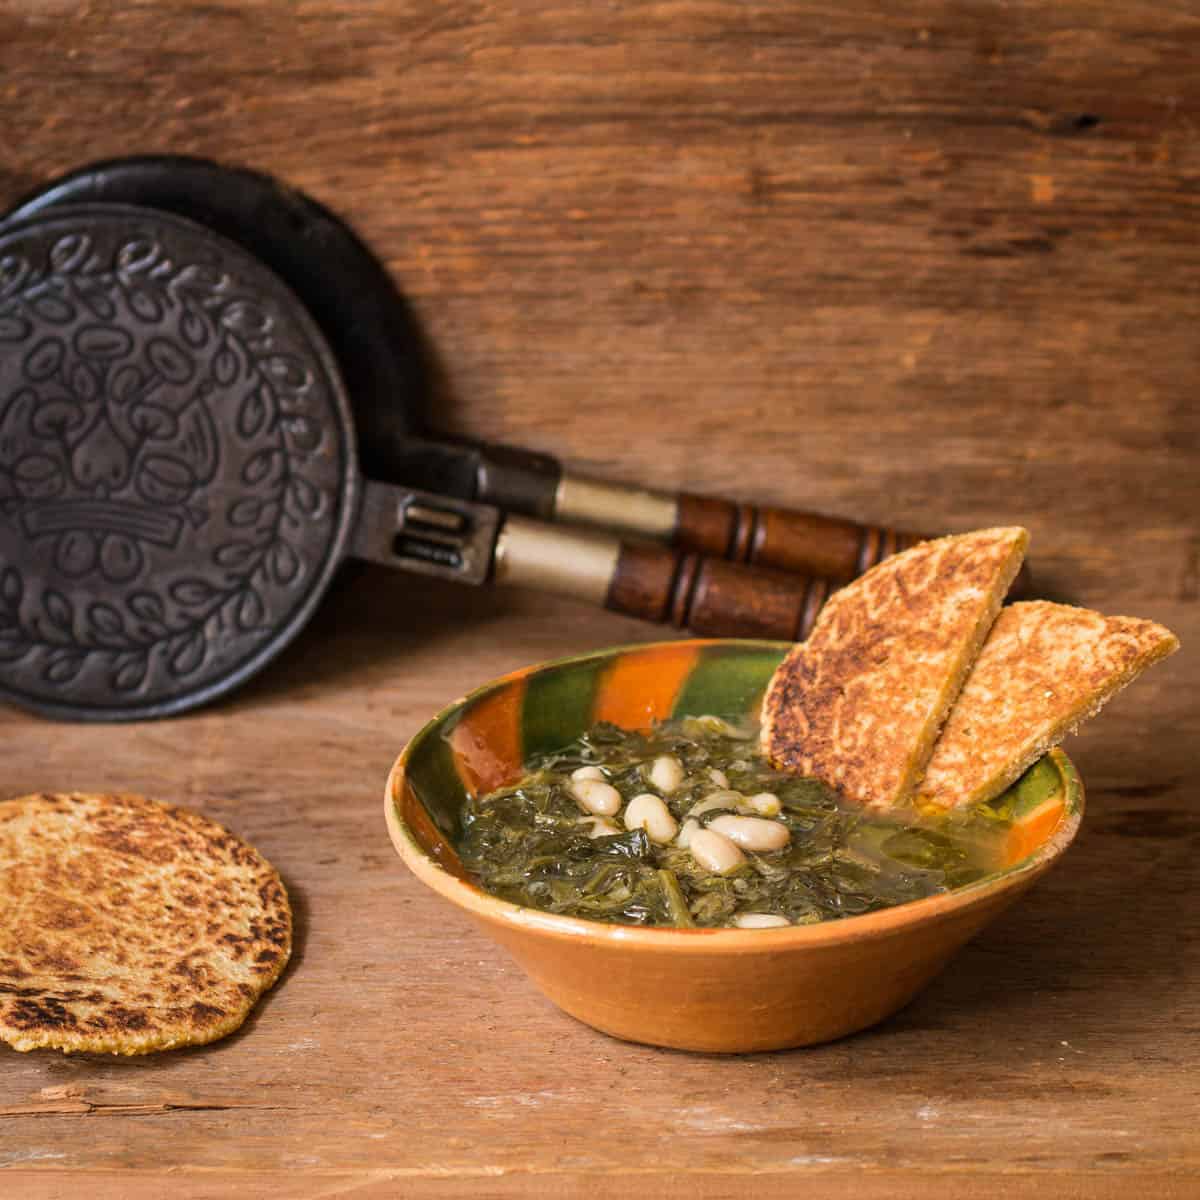 Ministrella Gallicano, an Italian soup of many wild greens and beans served with mignecci cakes